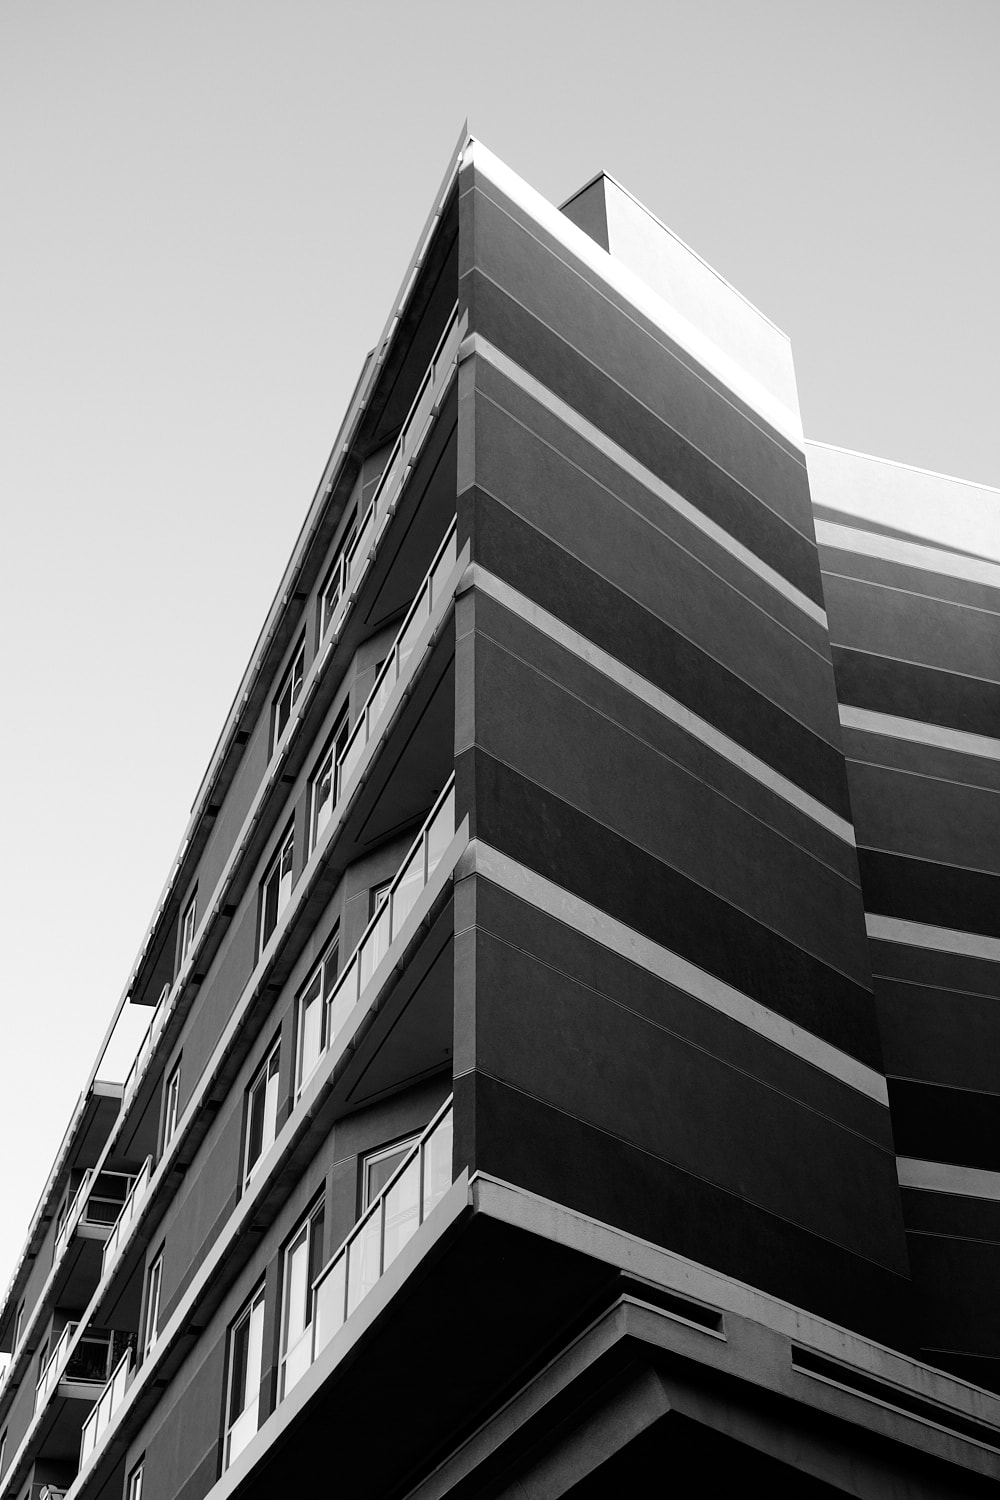 Black and white portrait photo highlighting the vertical angles and multiple colored facade of an apartment building.